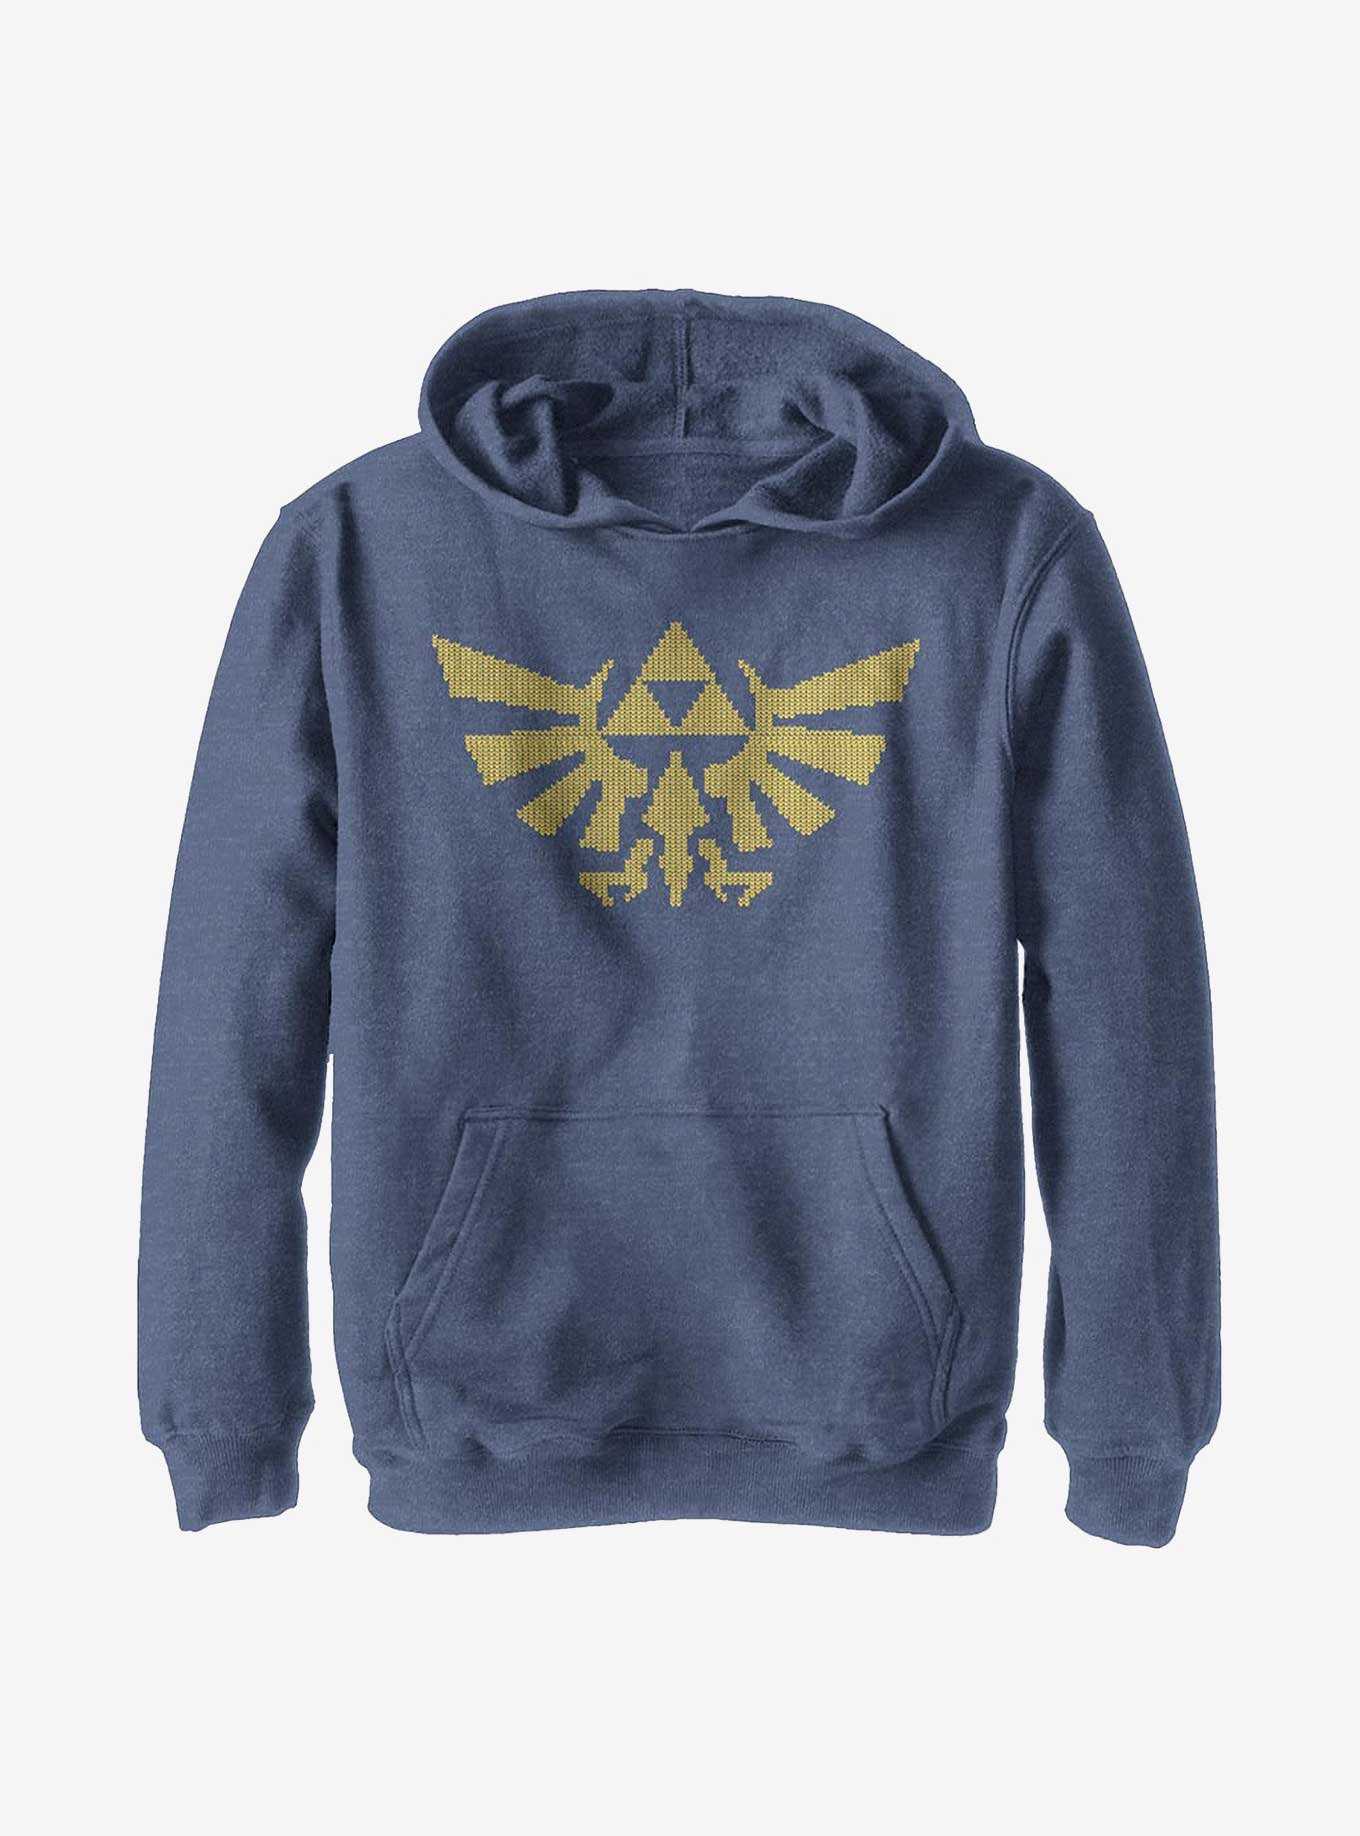 Nintendo The Legend Of Zelda Holiday Sweater Pattern Triforce Youth Hoodie, , hi-res